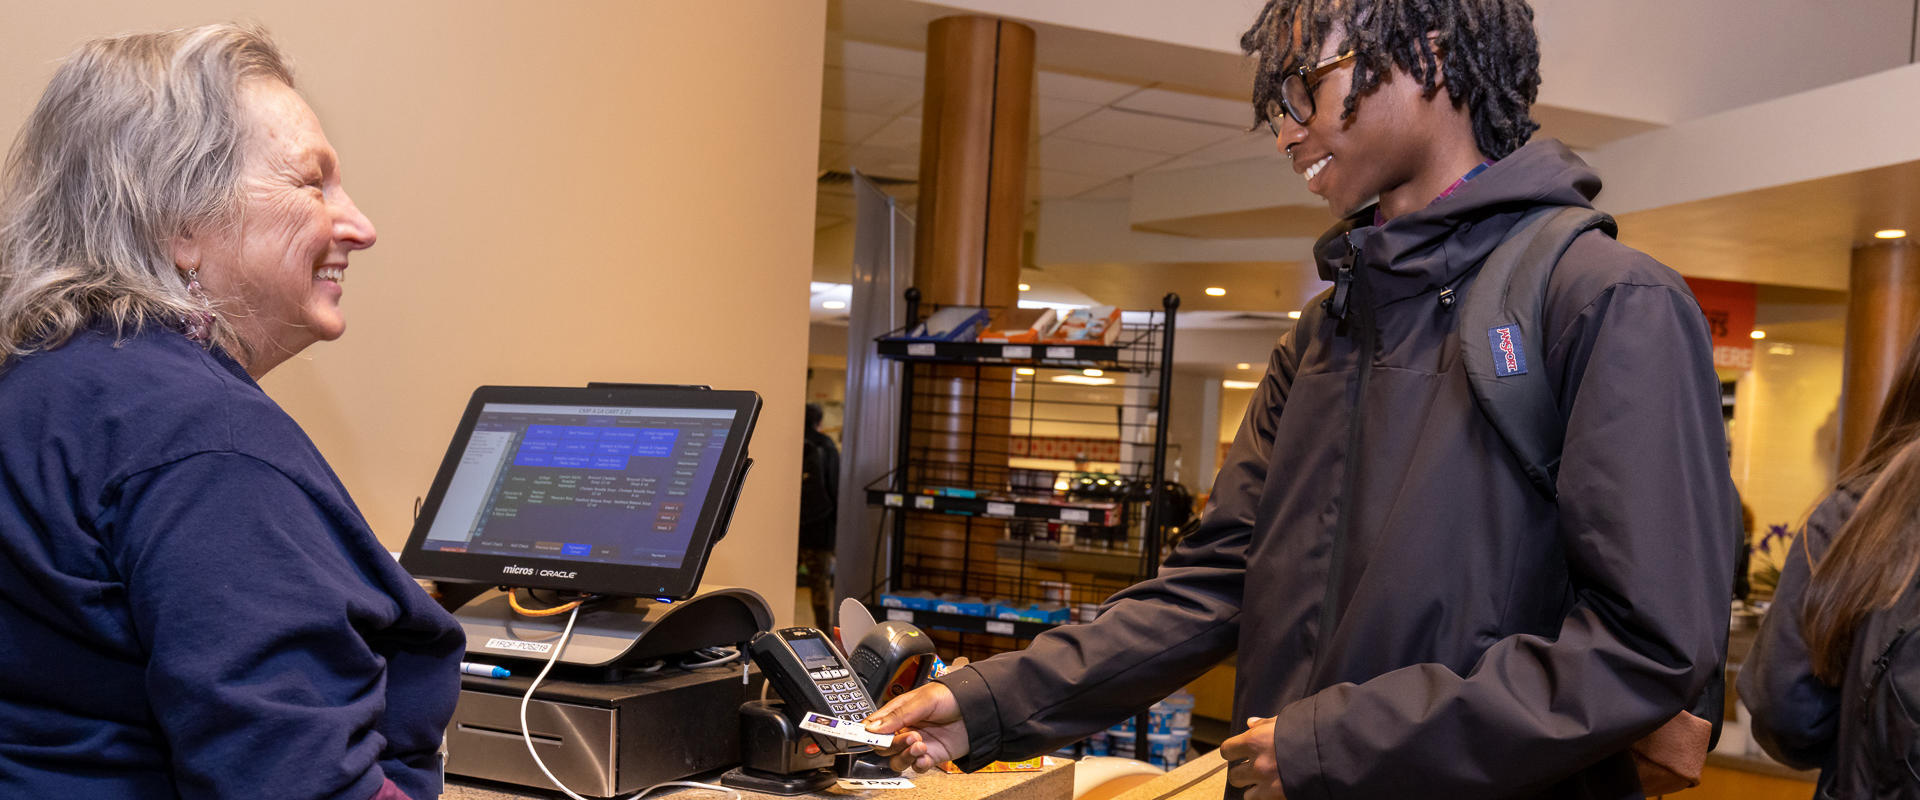 A student is swiping their meal card at a cashier station in the food court